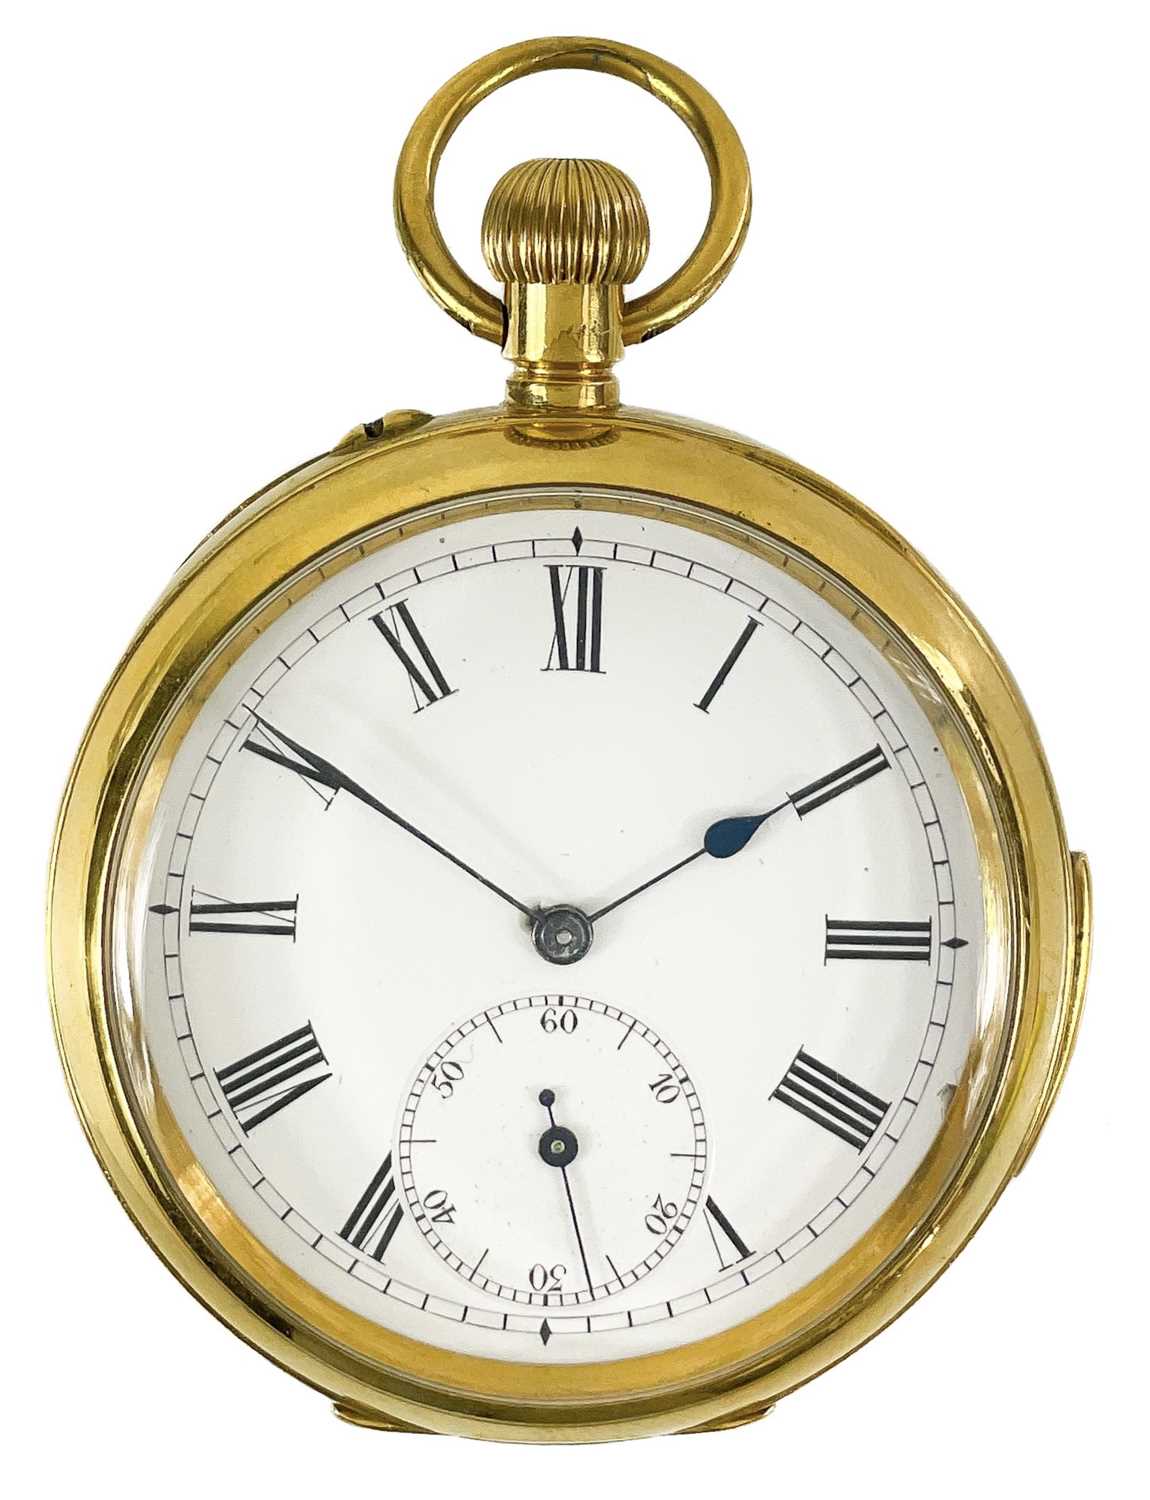 Lot 25 - A gold-plated quarter repeating crown wind pocket watch.